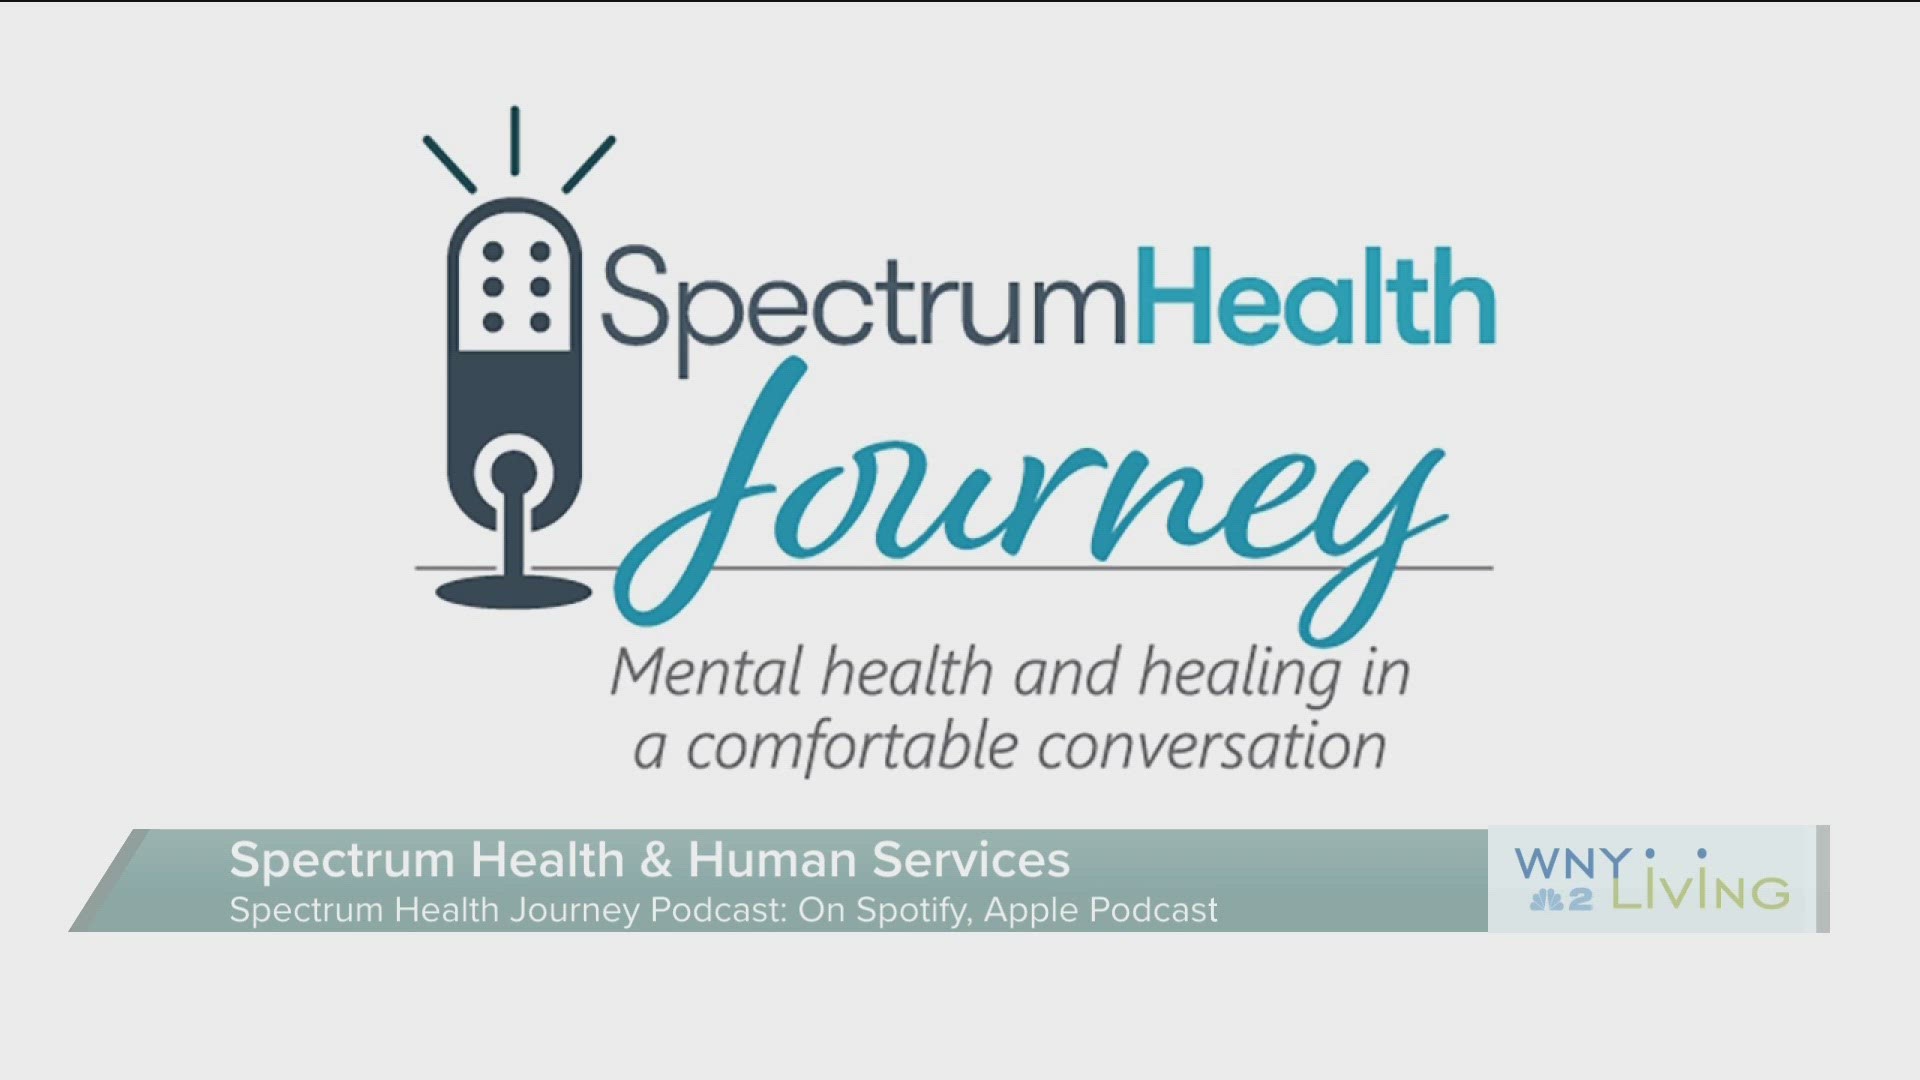 WNY Living - May 27 - Spectrum Health & Human Services (THIS VIDEO IS SPONSORED BY SPECTRUM HEALTH AND HUMAN SERVICES)